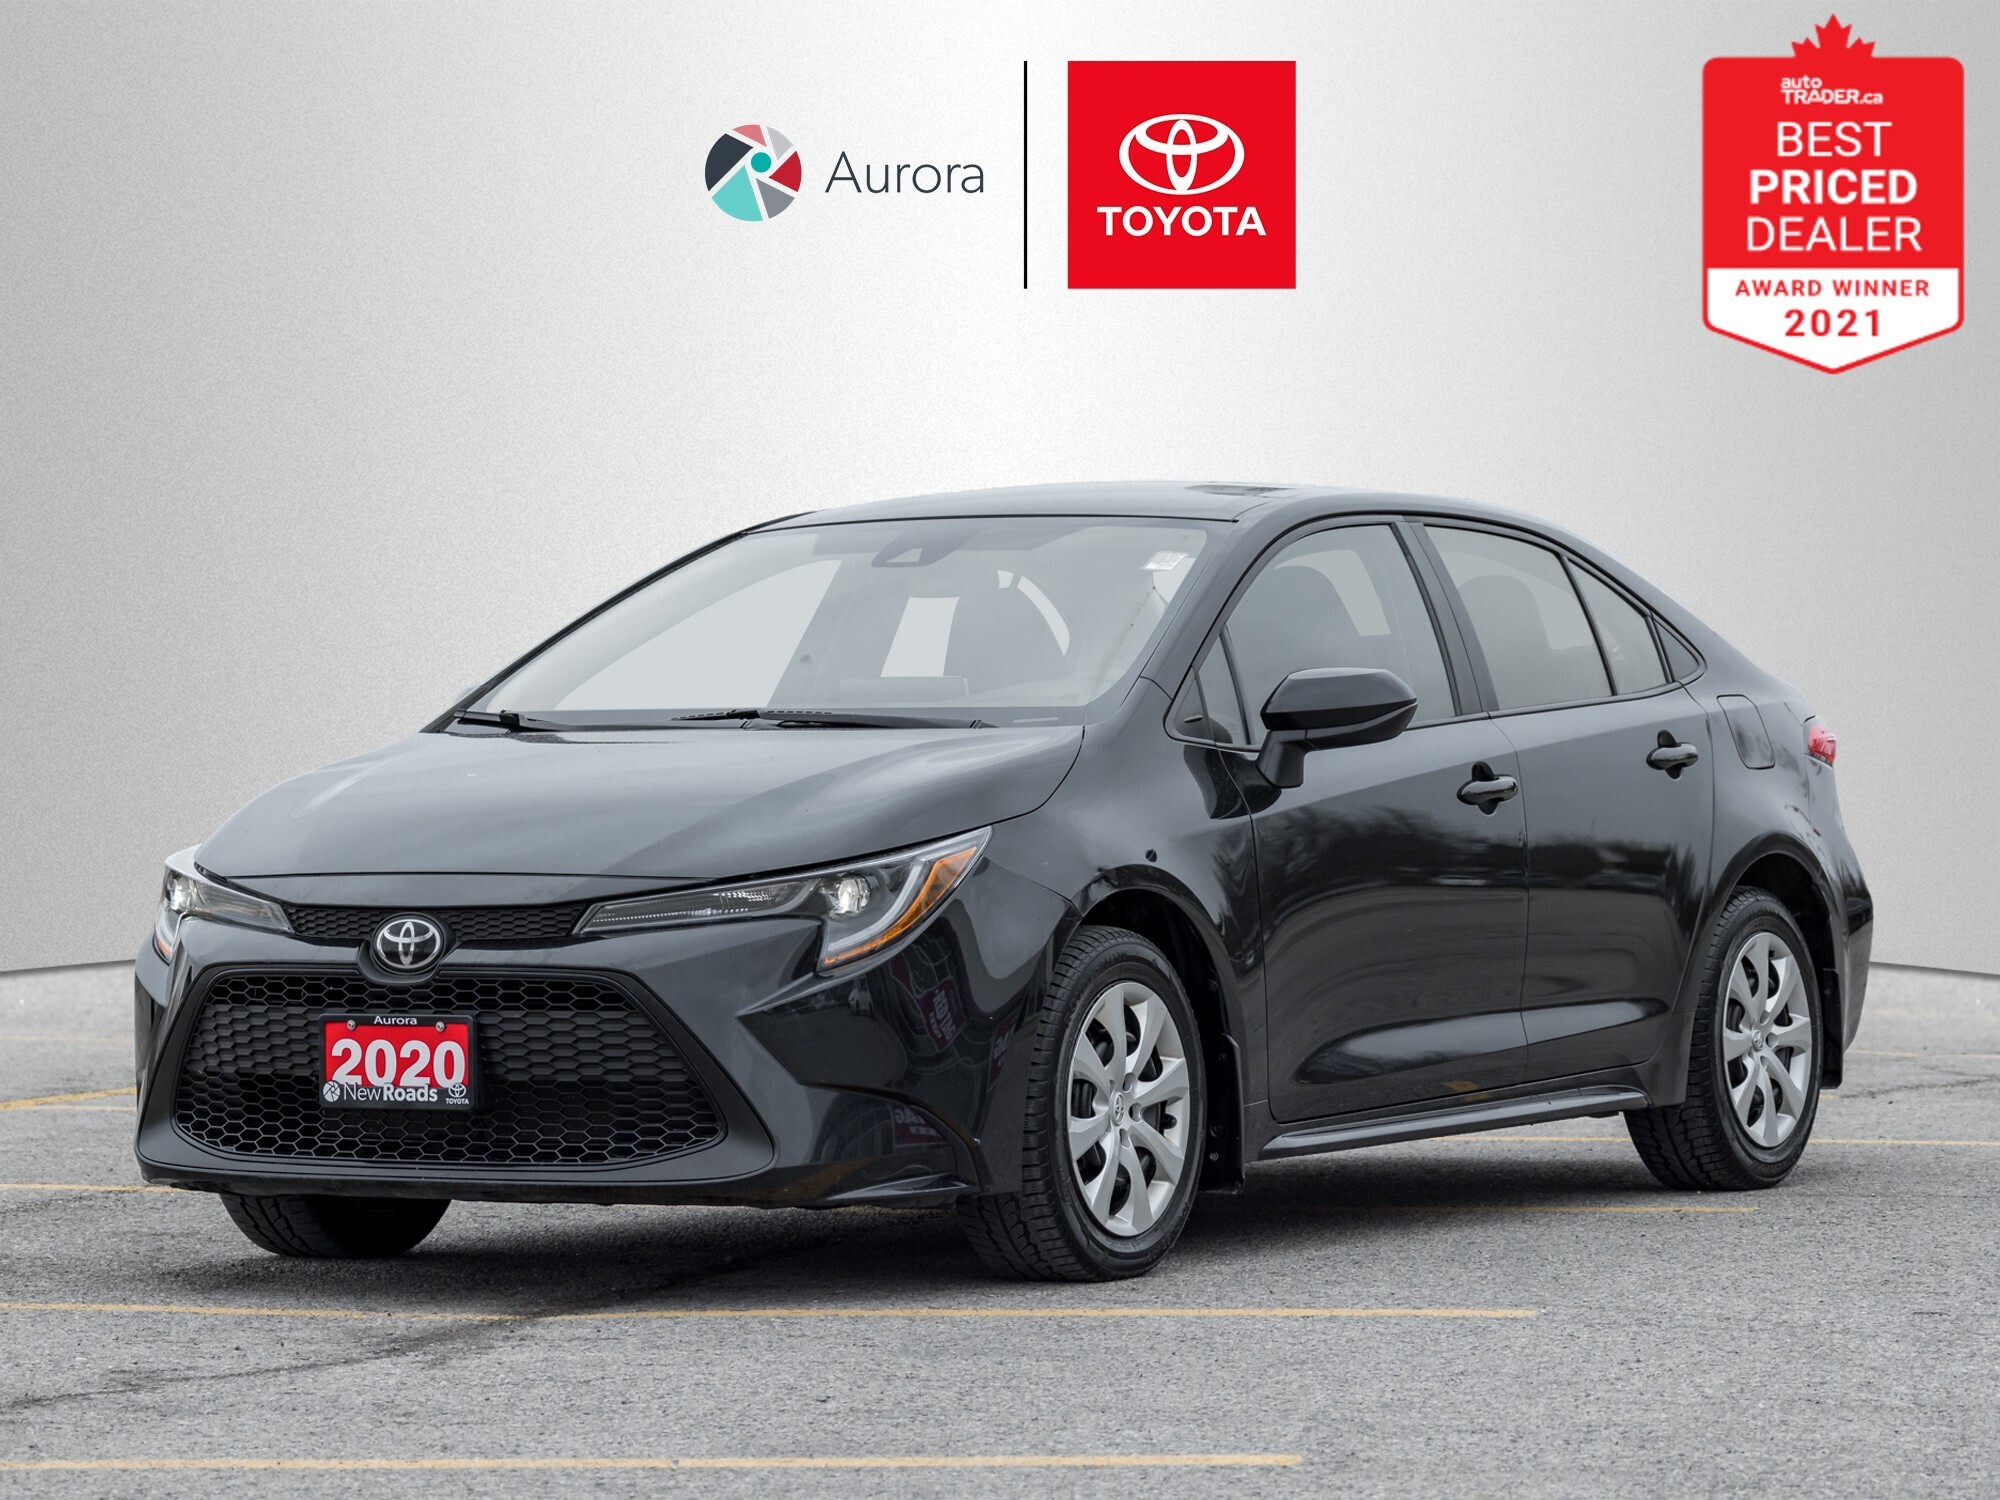 2020 Toyota Corolla LE, Locally Owned, One Owner, Priced Below Current